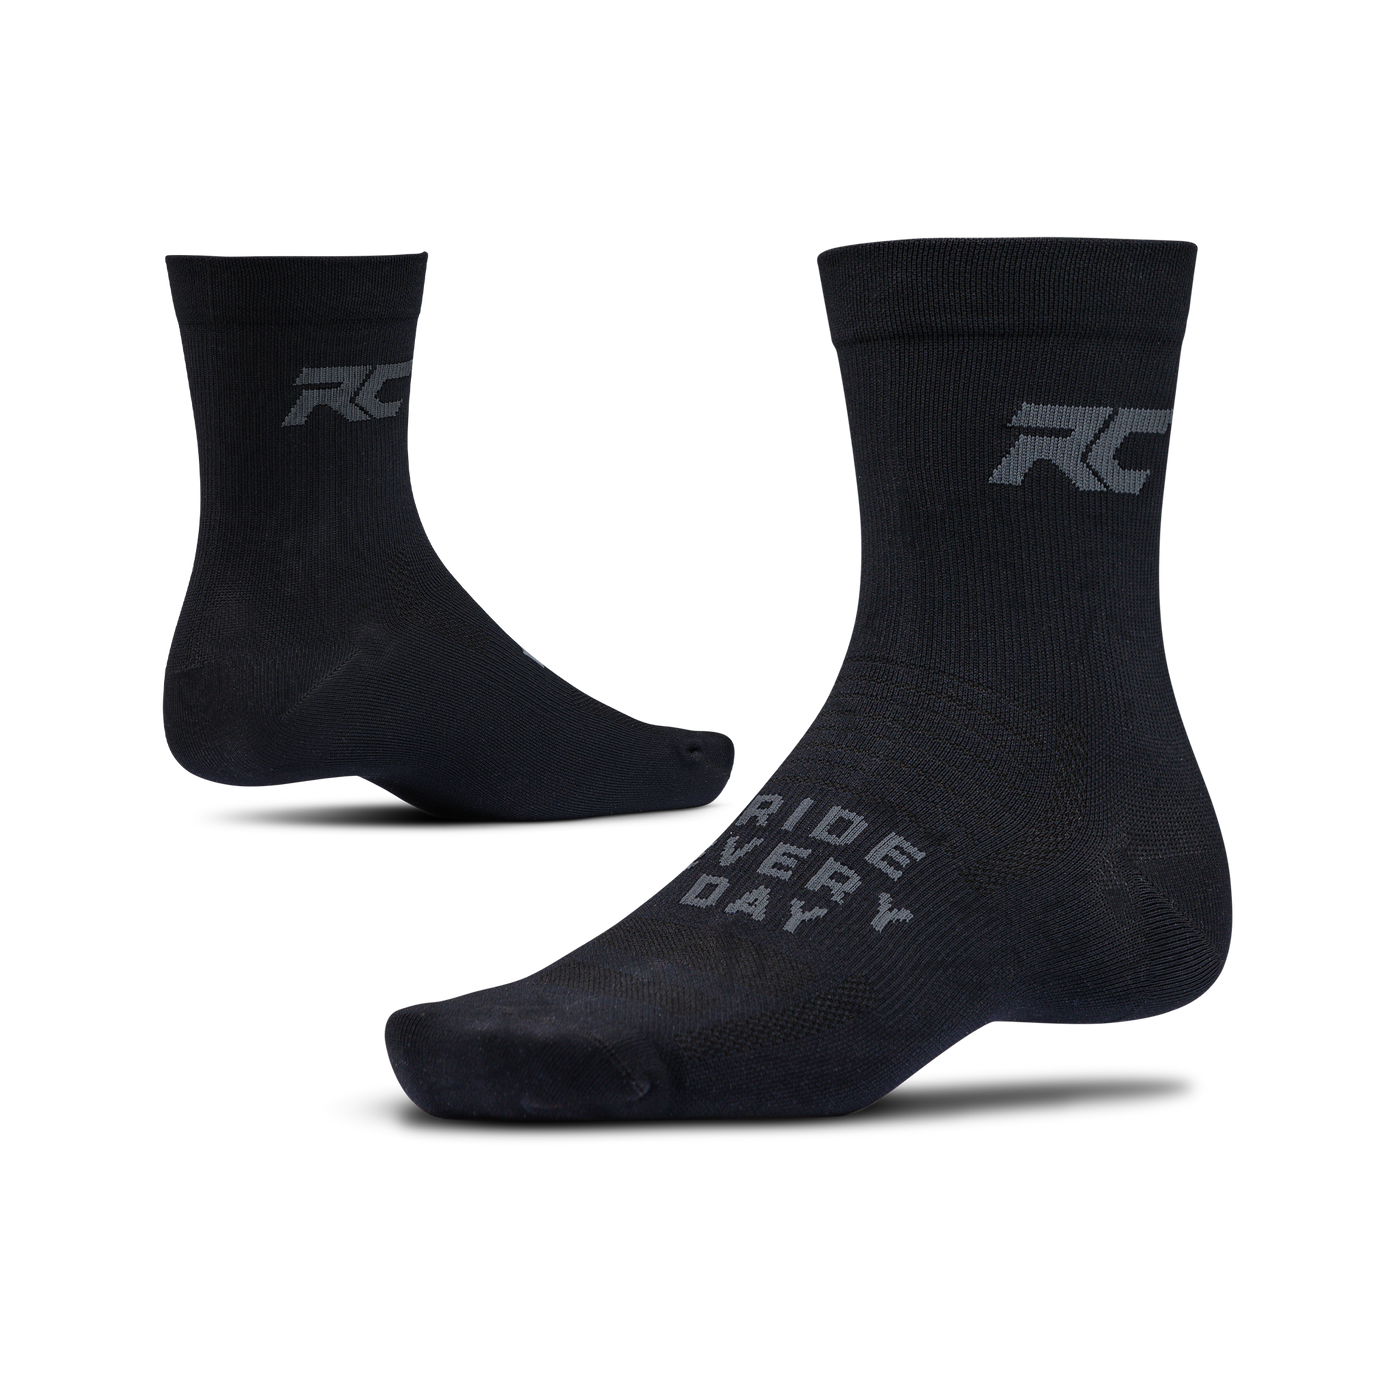 Ride Concepts Core Synthetic 6" Socks - Black